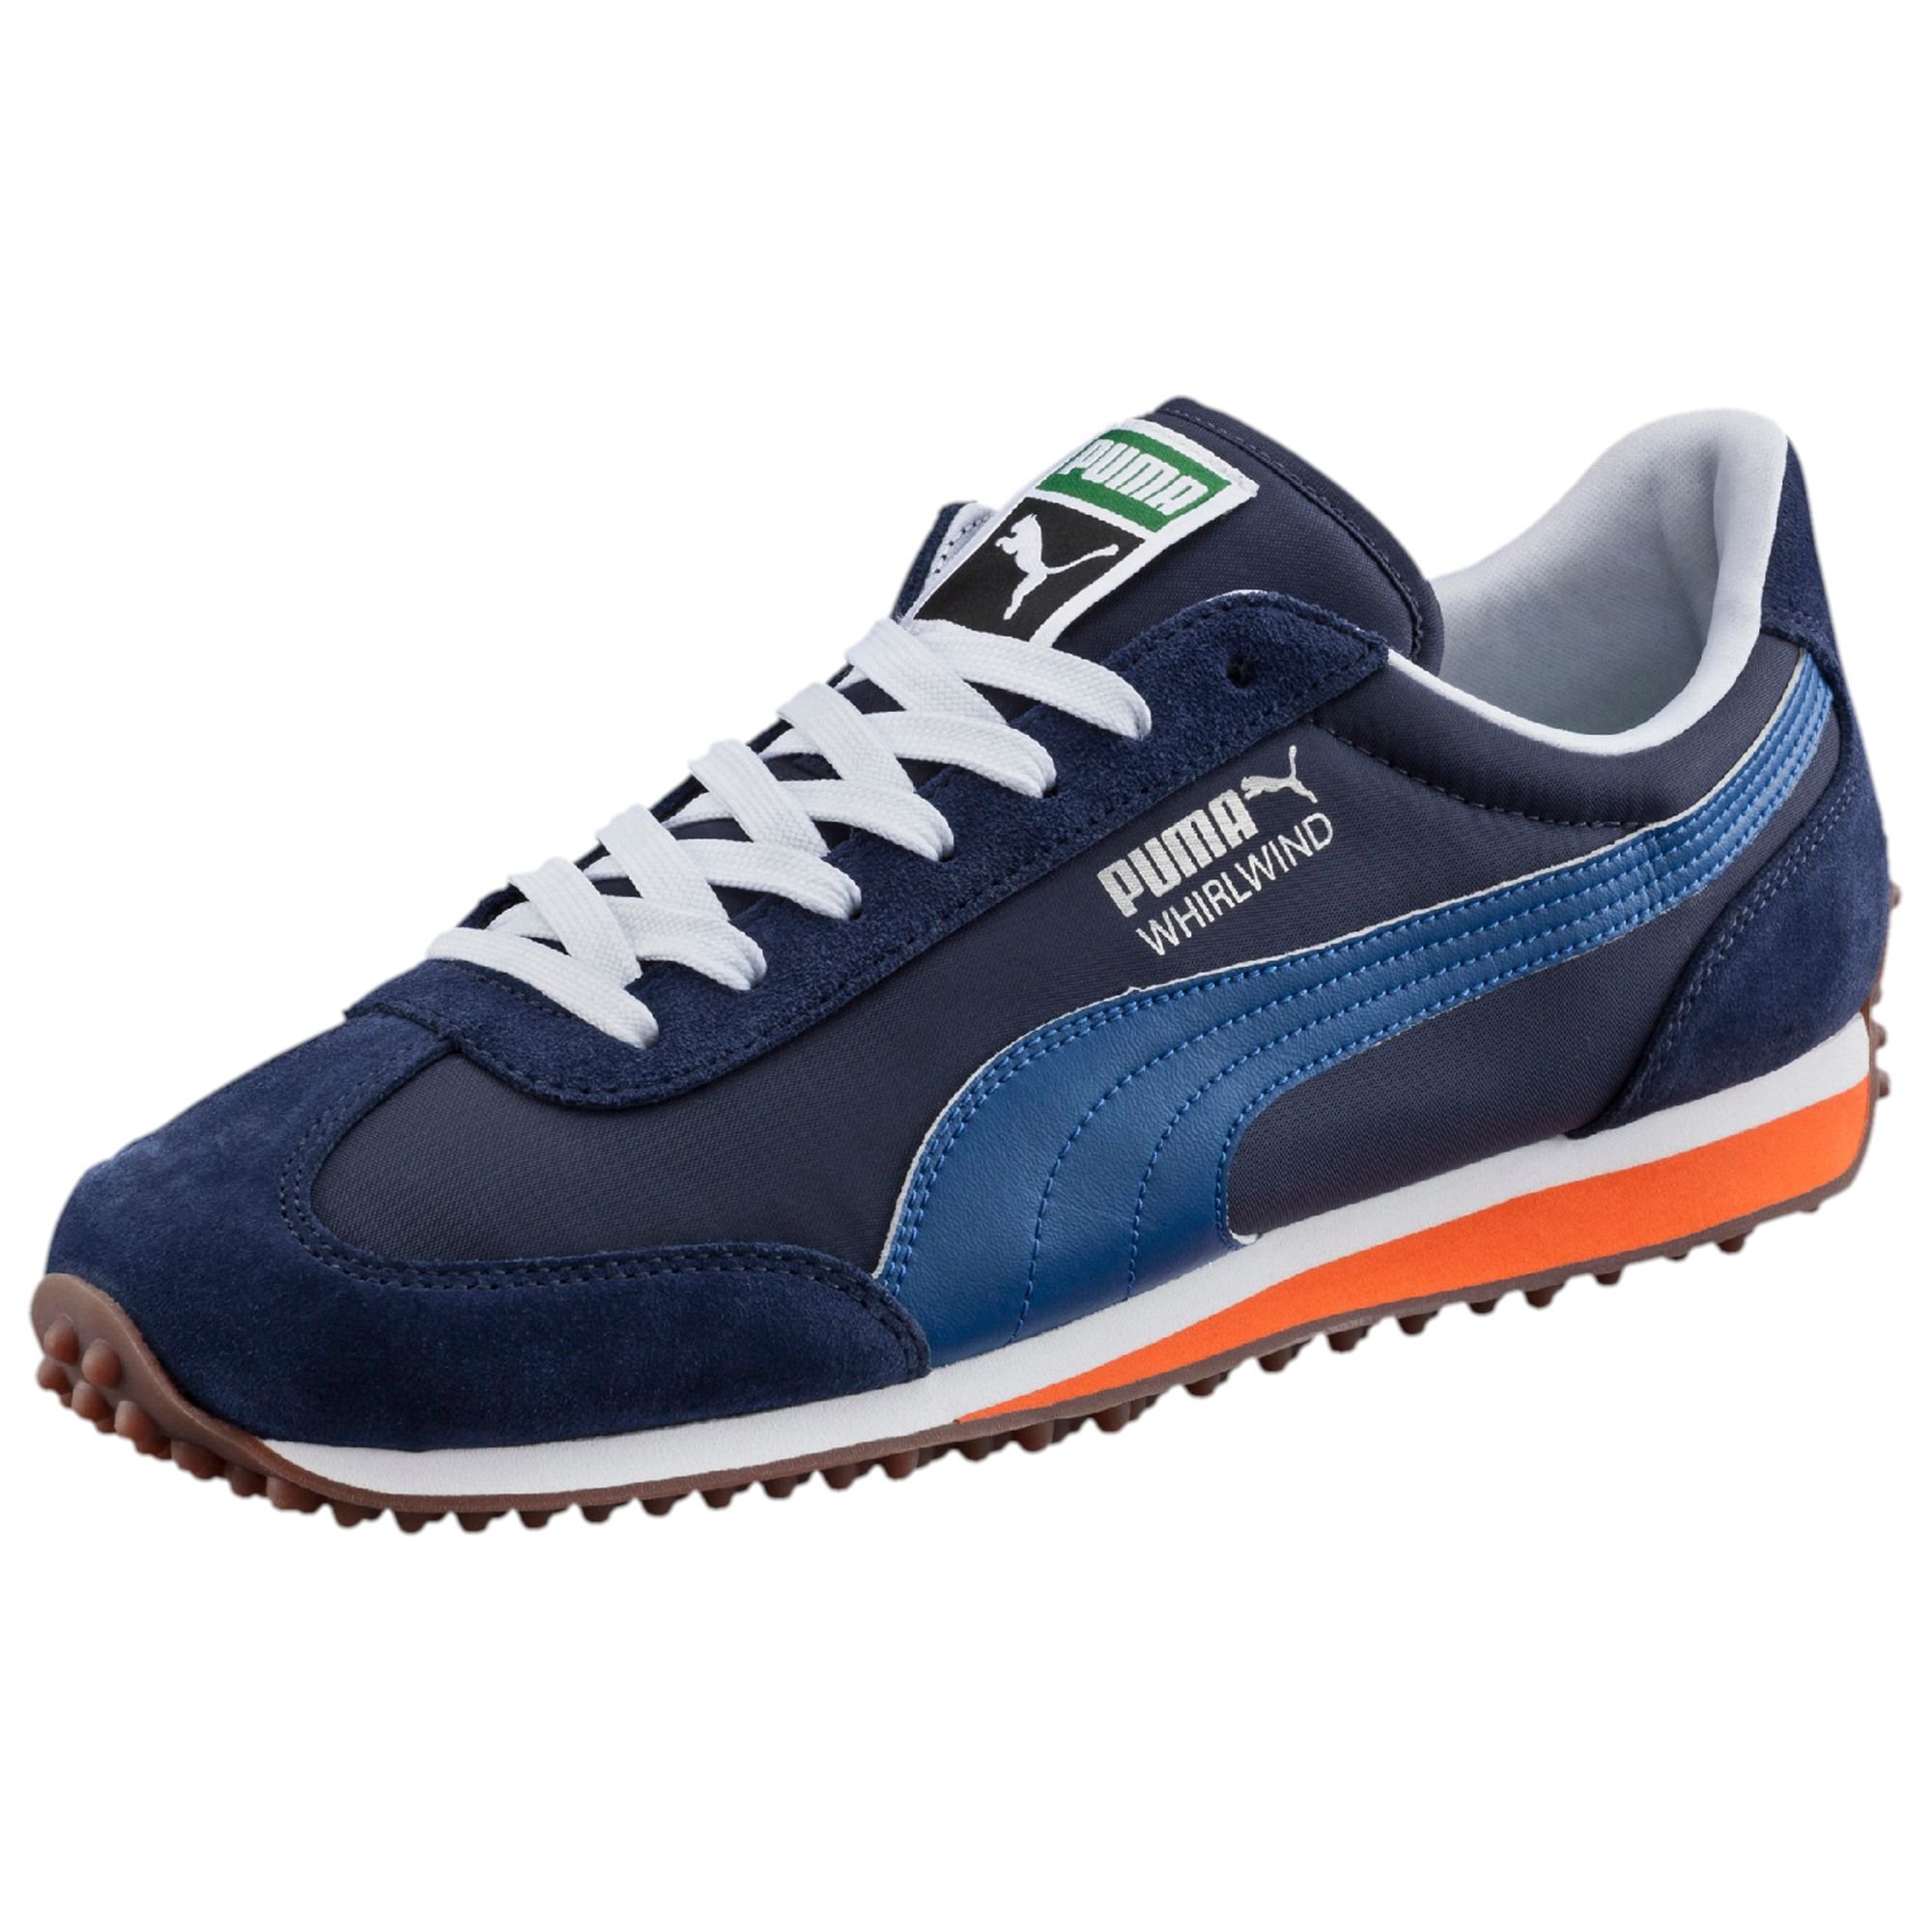 PUMA Synthetic Whirlwind Classic Men's 